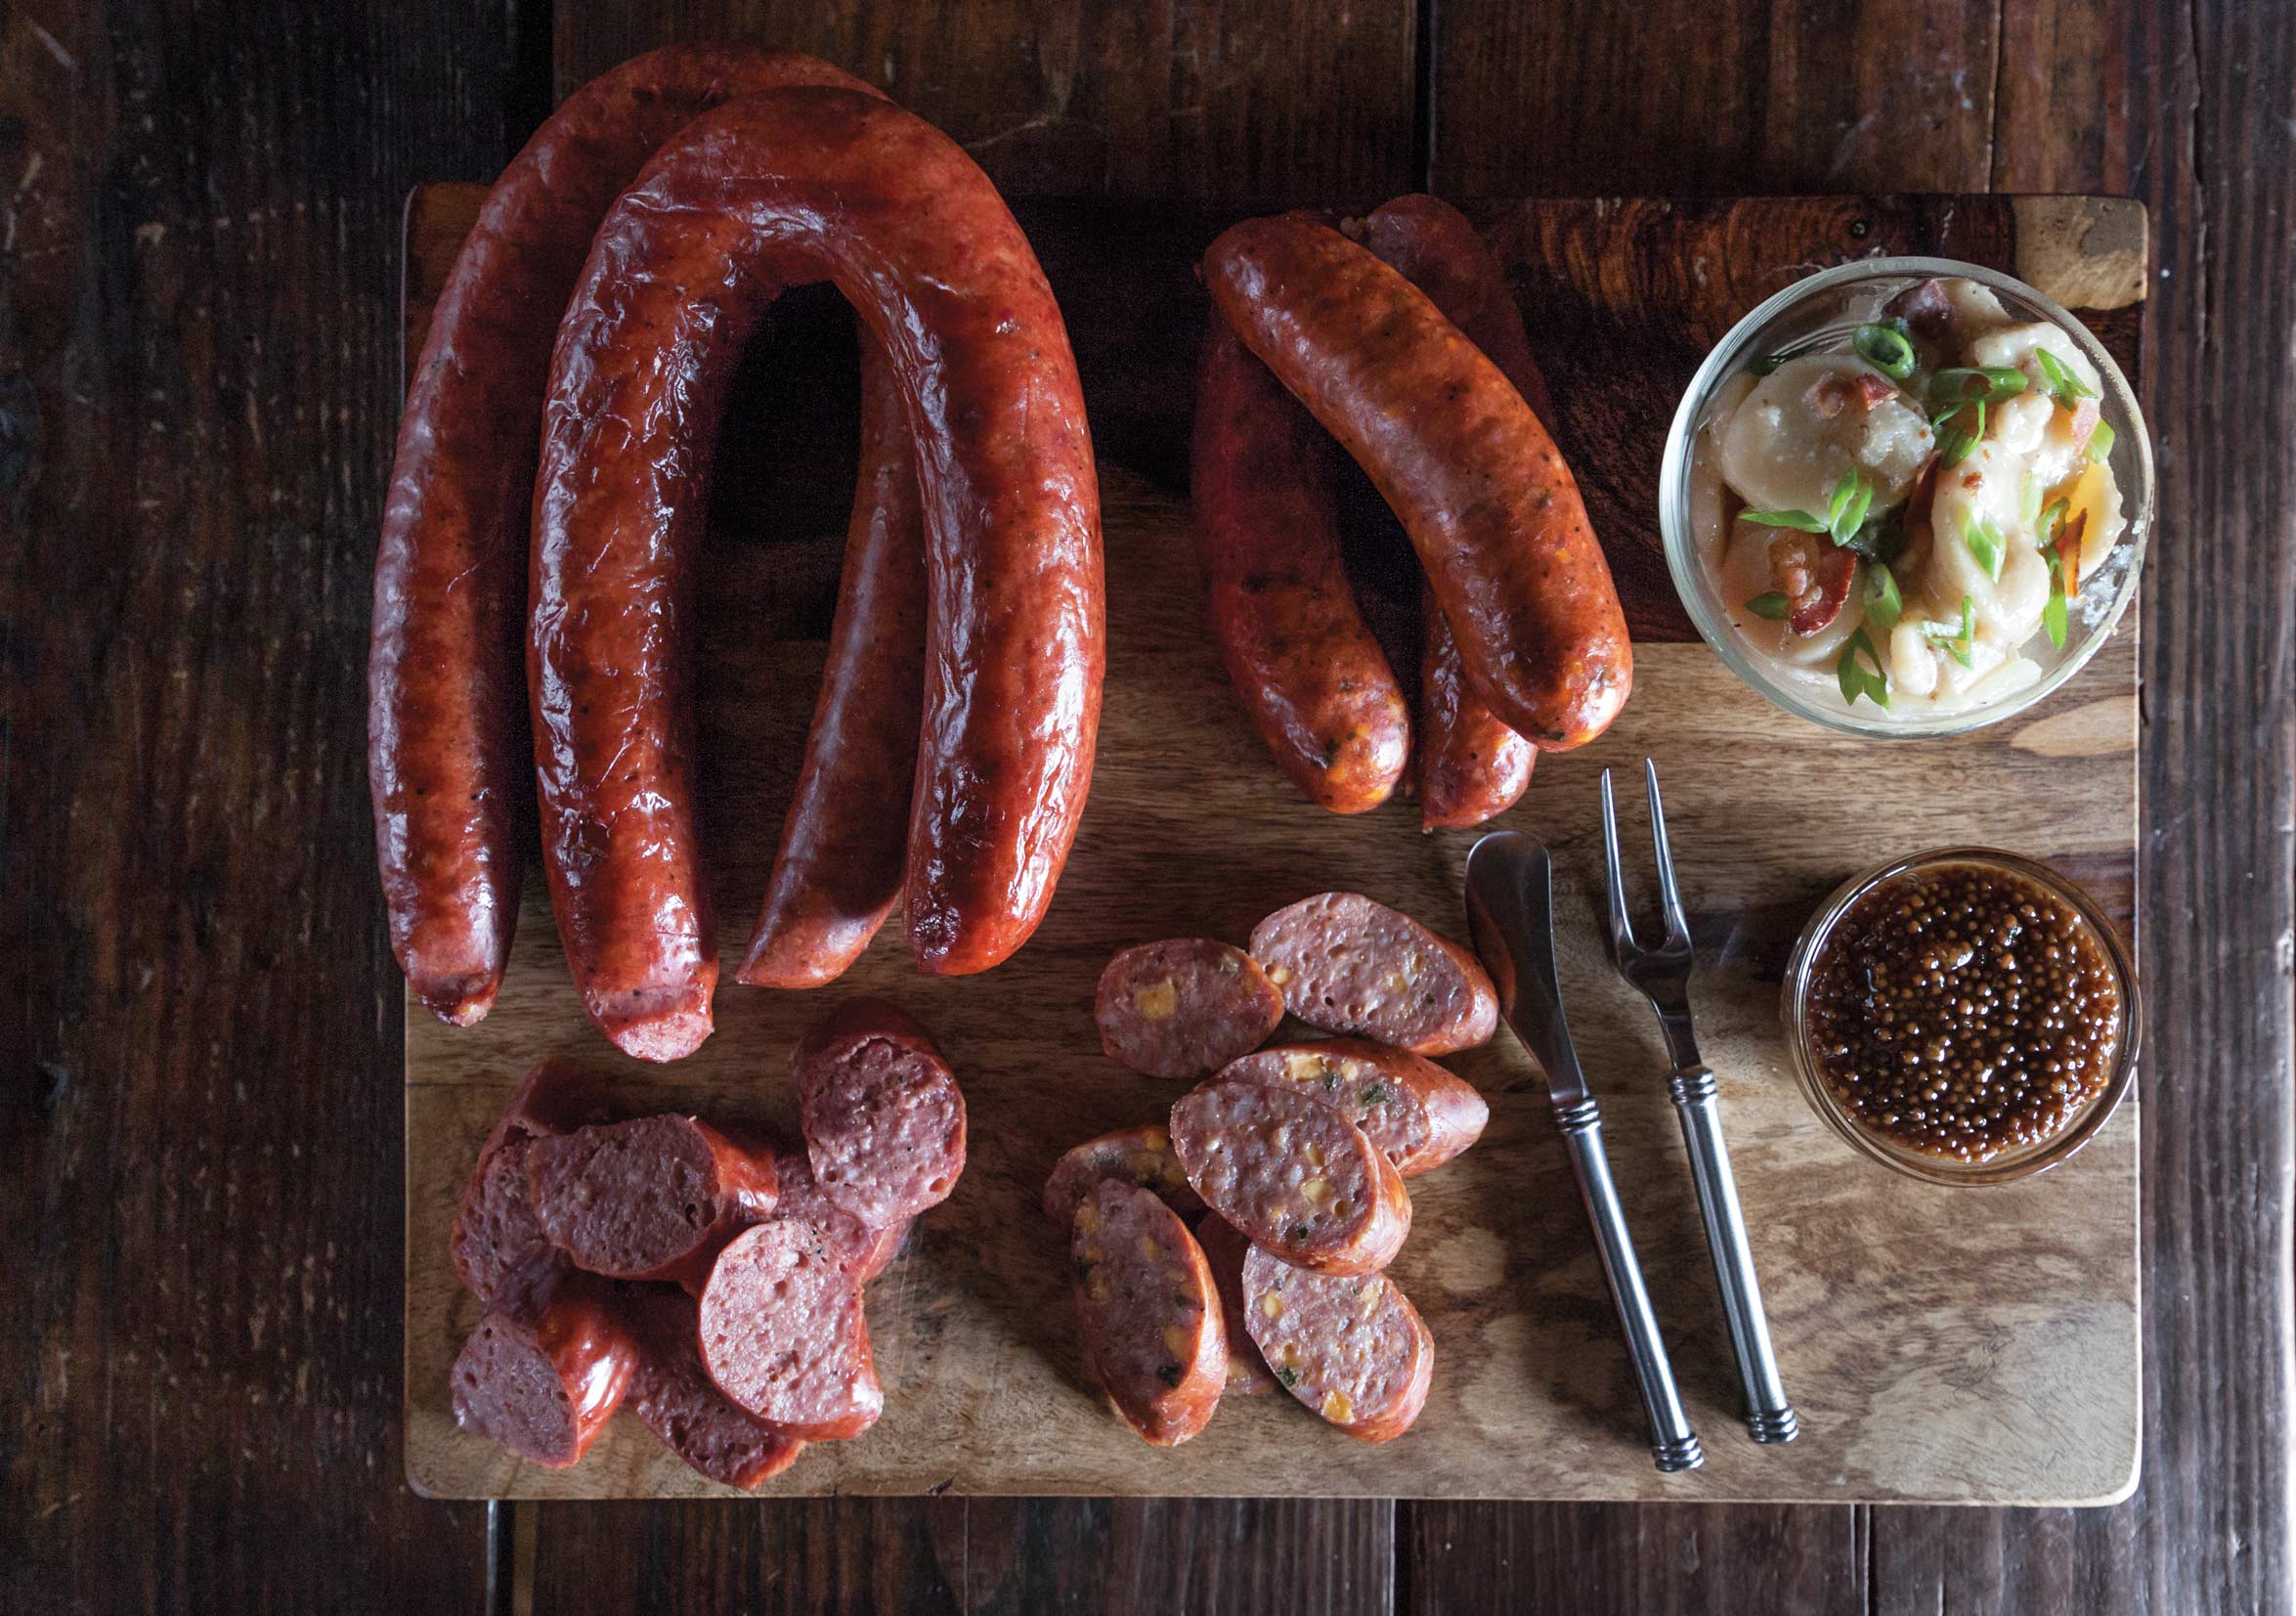 Opa's sausages on a platter